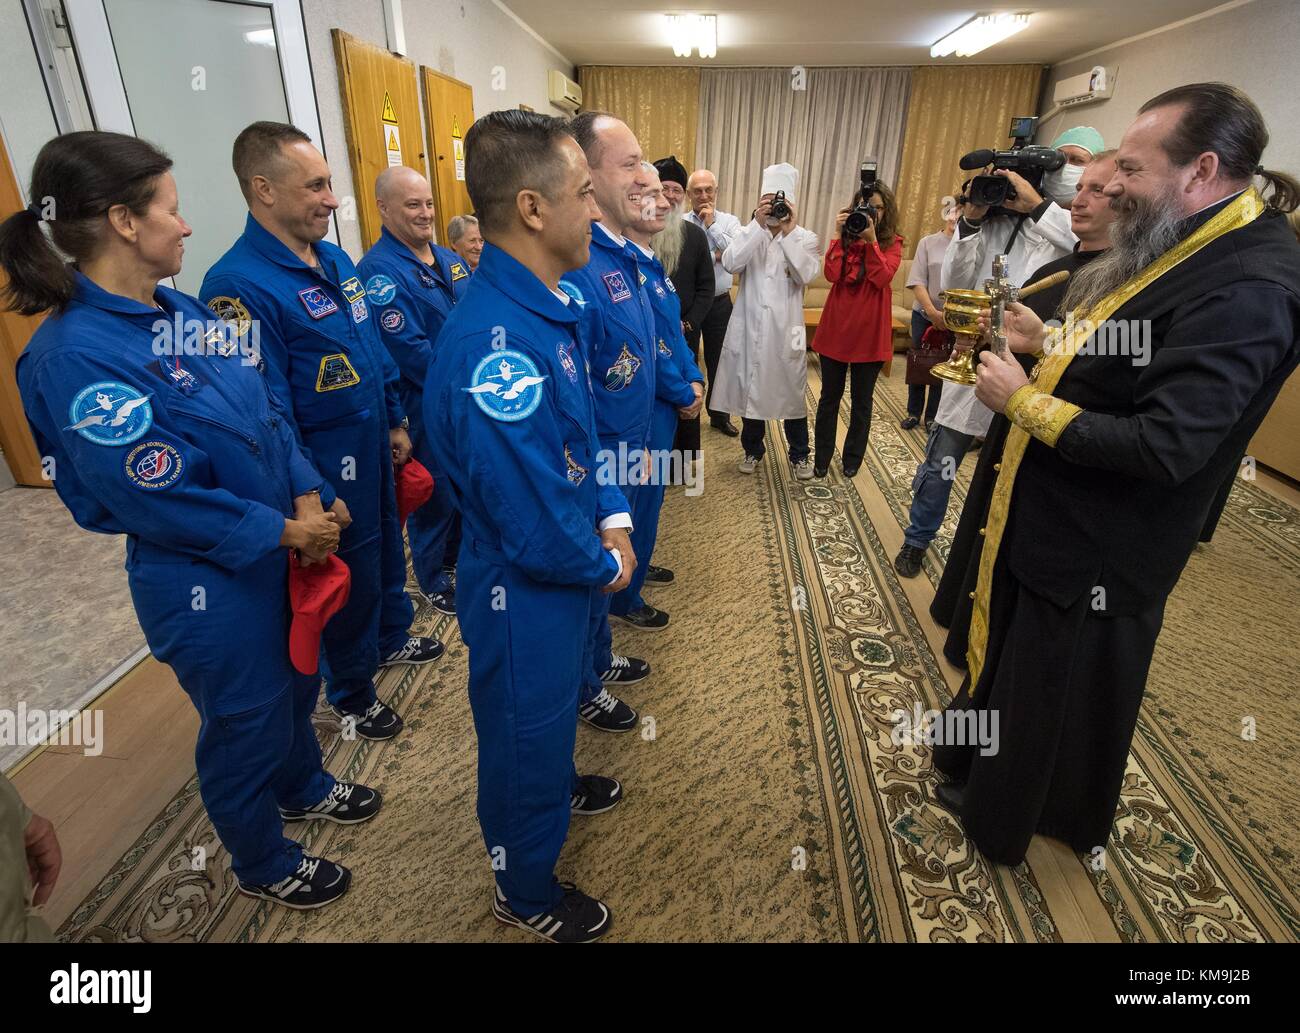 A Russian Orthodox priest blesses NASA International Space Station Expedition 53 prime and backup crew members (front, L-R) American astronaut Joe Acaba, Russian cosmonaut Alexander Misurkin of Roscosmos, American astronauts Mark Vande Hei, (back, L-R) Shannon Walker, Russian cosmonaut Anton Shkaplerov and American astronaut Scott Tingle before their launch aboard the Soyuz MS-06 spacecraft at the Cosmonaut Hotel September 12, 2017 in Baikonur, Kazakhstan.  (photo by Bill Ingalls via Planetpix) Stock Photo